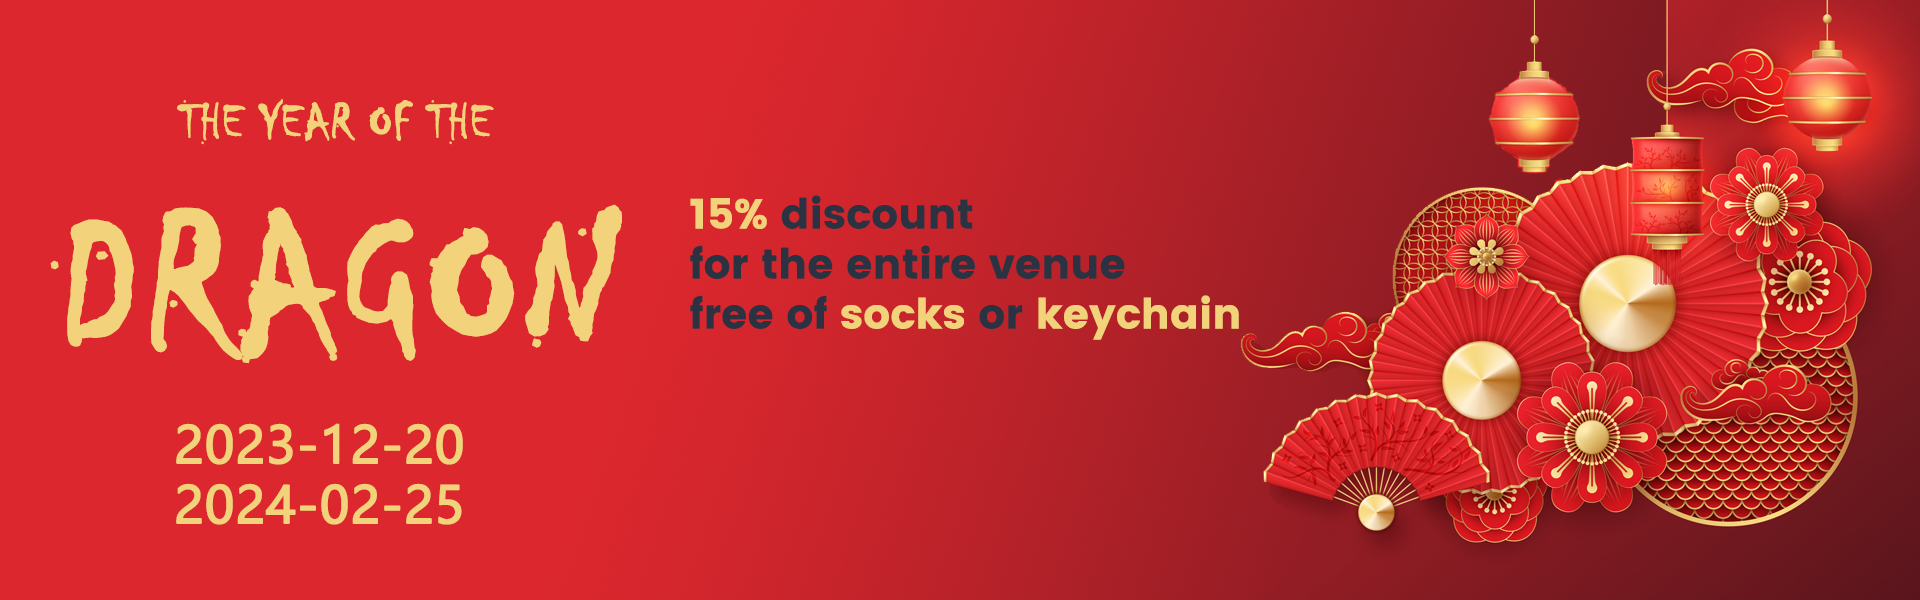 MaySneakers Chinese New Year Promotion